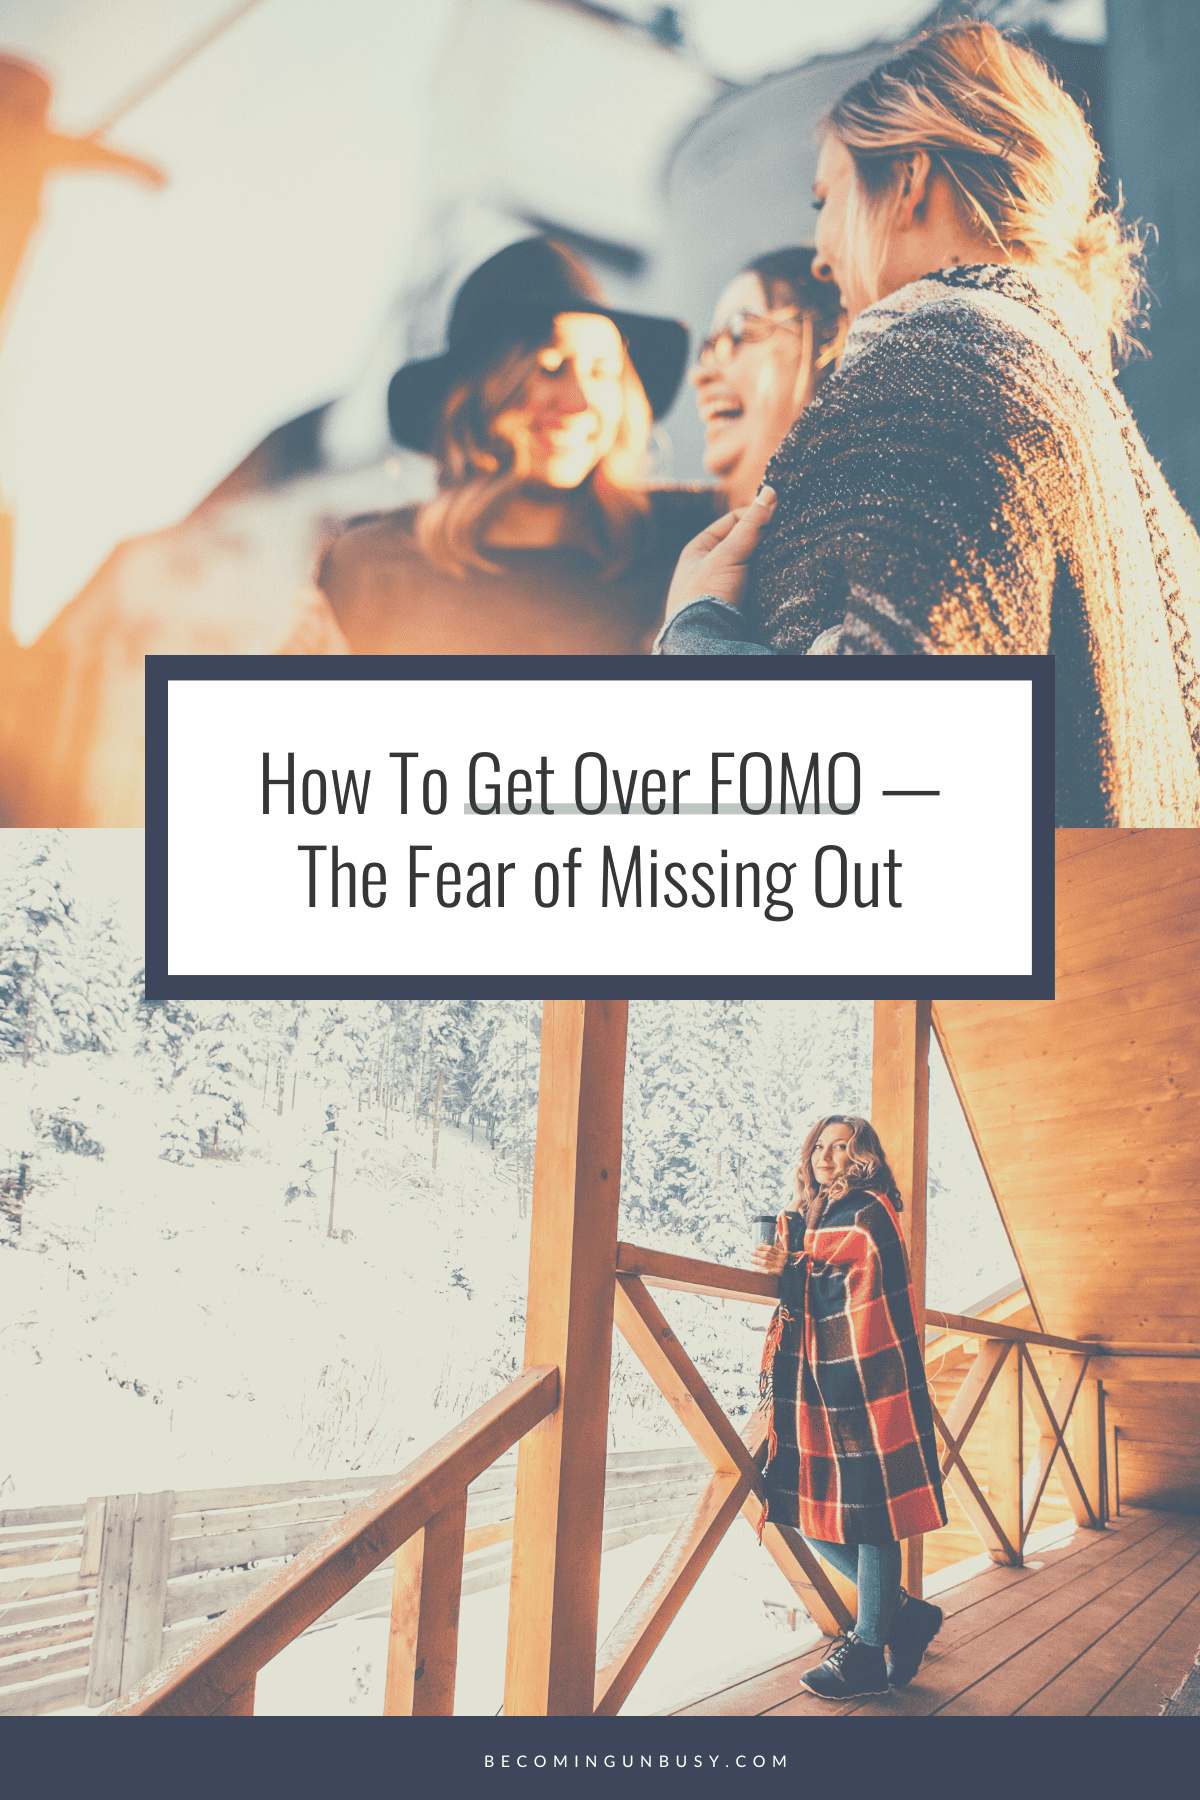 A collage for Pinterest including: (1) The article title "How To Get Over FOMO," (2) a photo of a woman wrapped in a wool blanket and smiling because she knows how to get over FOMO and (3) a photo of a group of women talking.